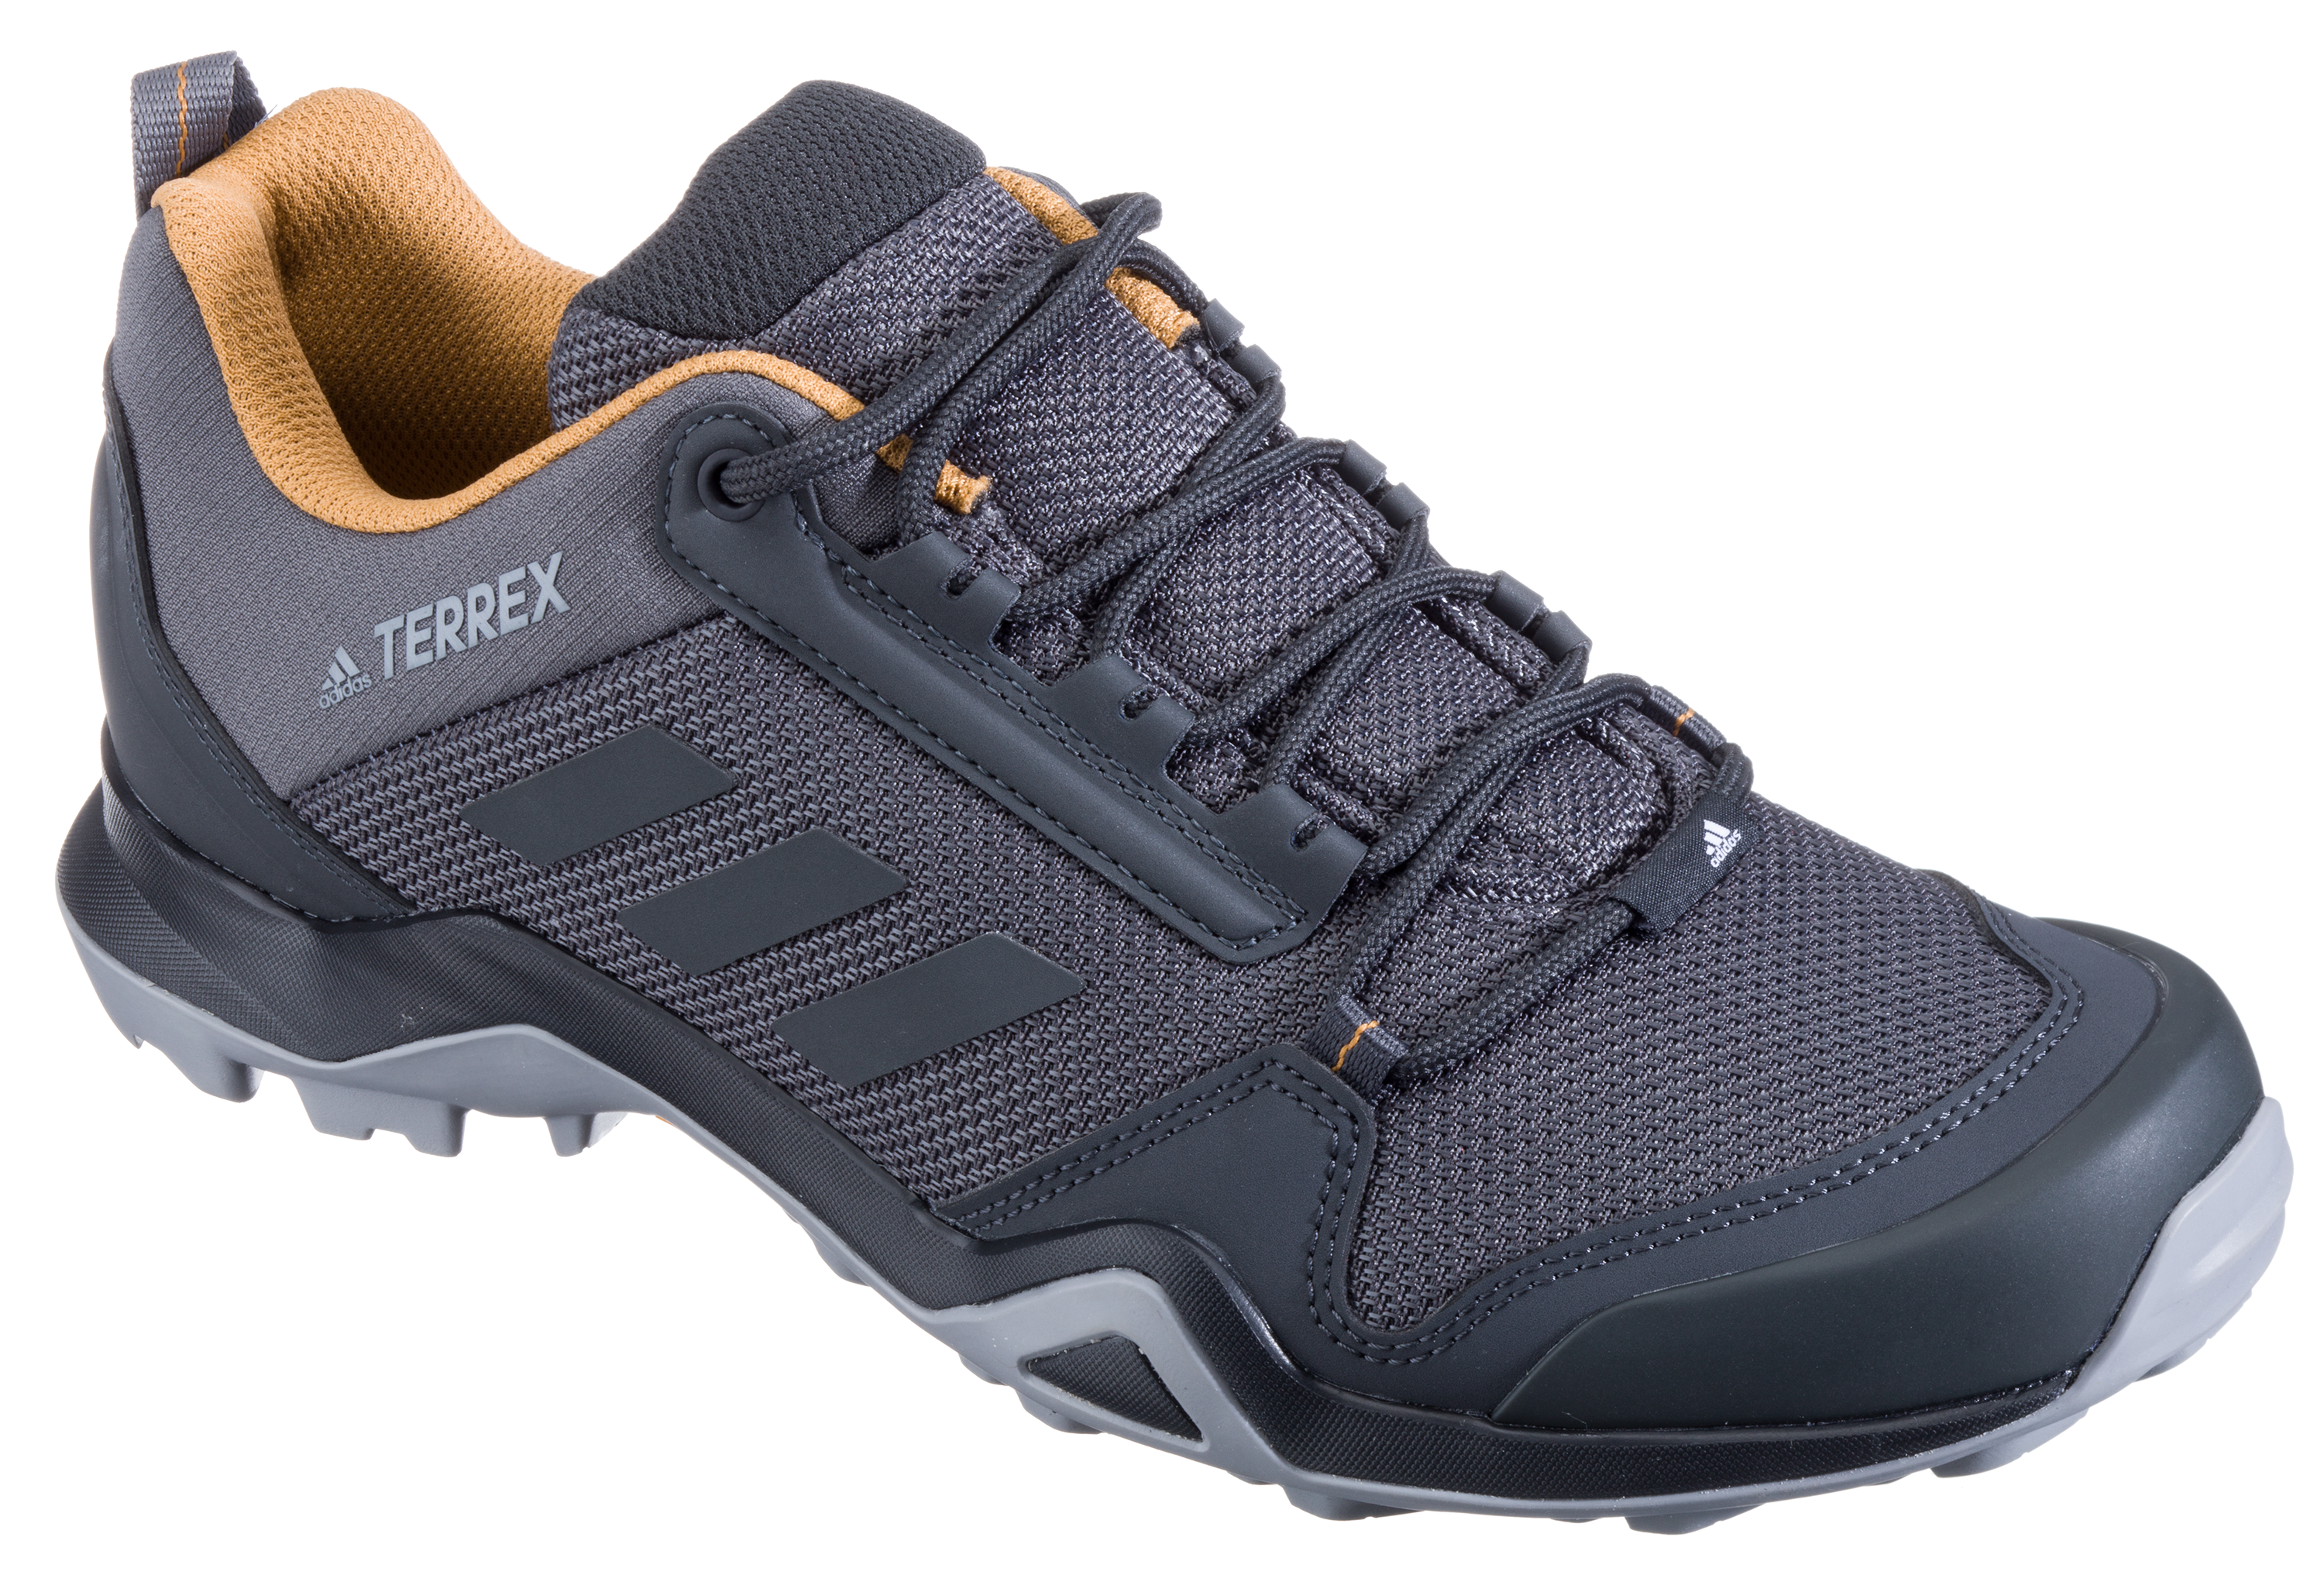 Previous Greeting label adidas Terrex AX3 Hiking Shoes for Men | Bass Pro Shops